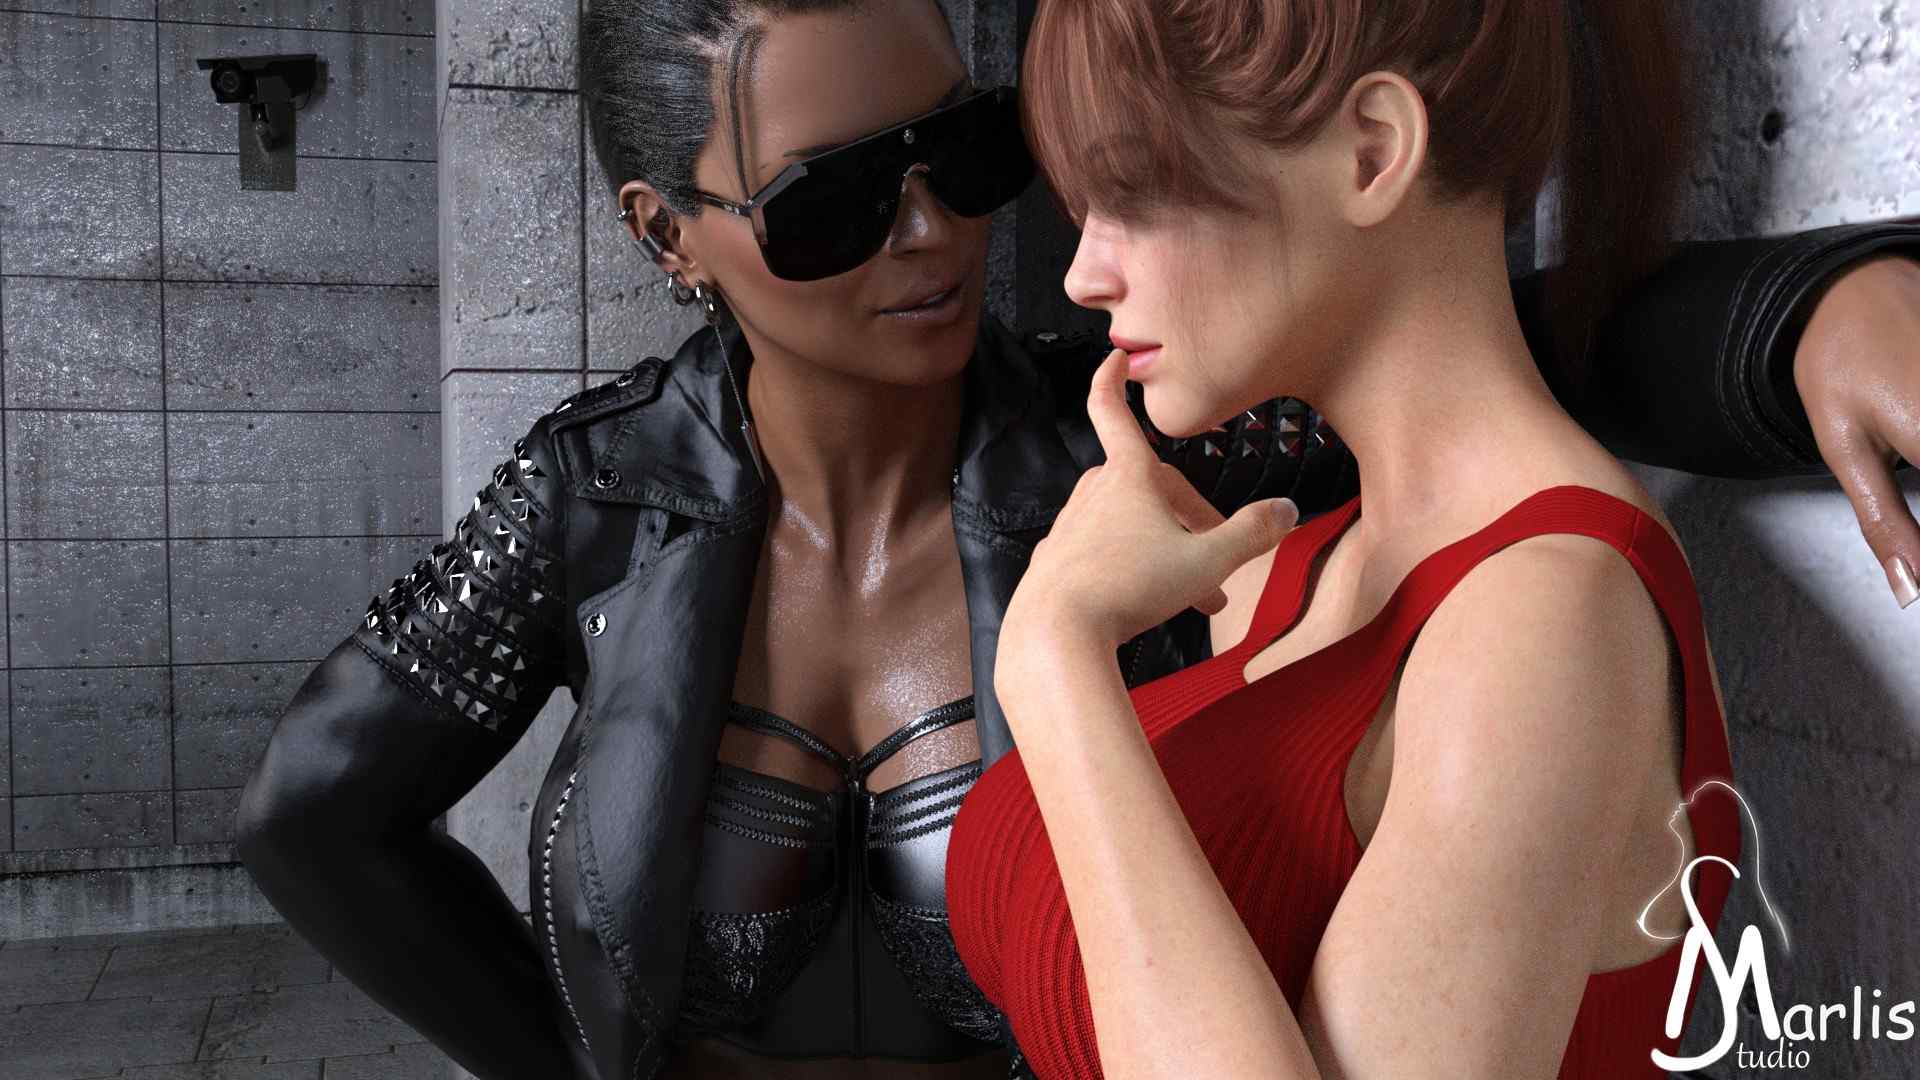 Biker and Her Girl: Motion Comic